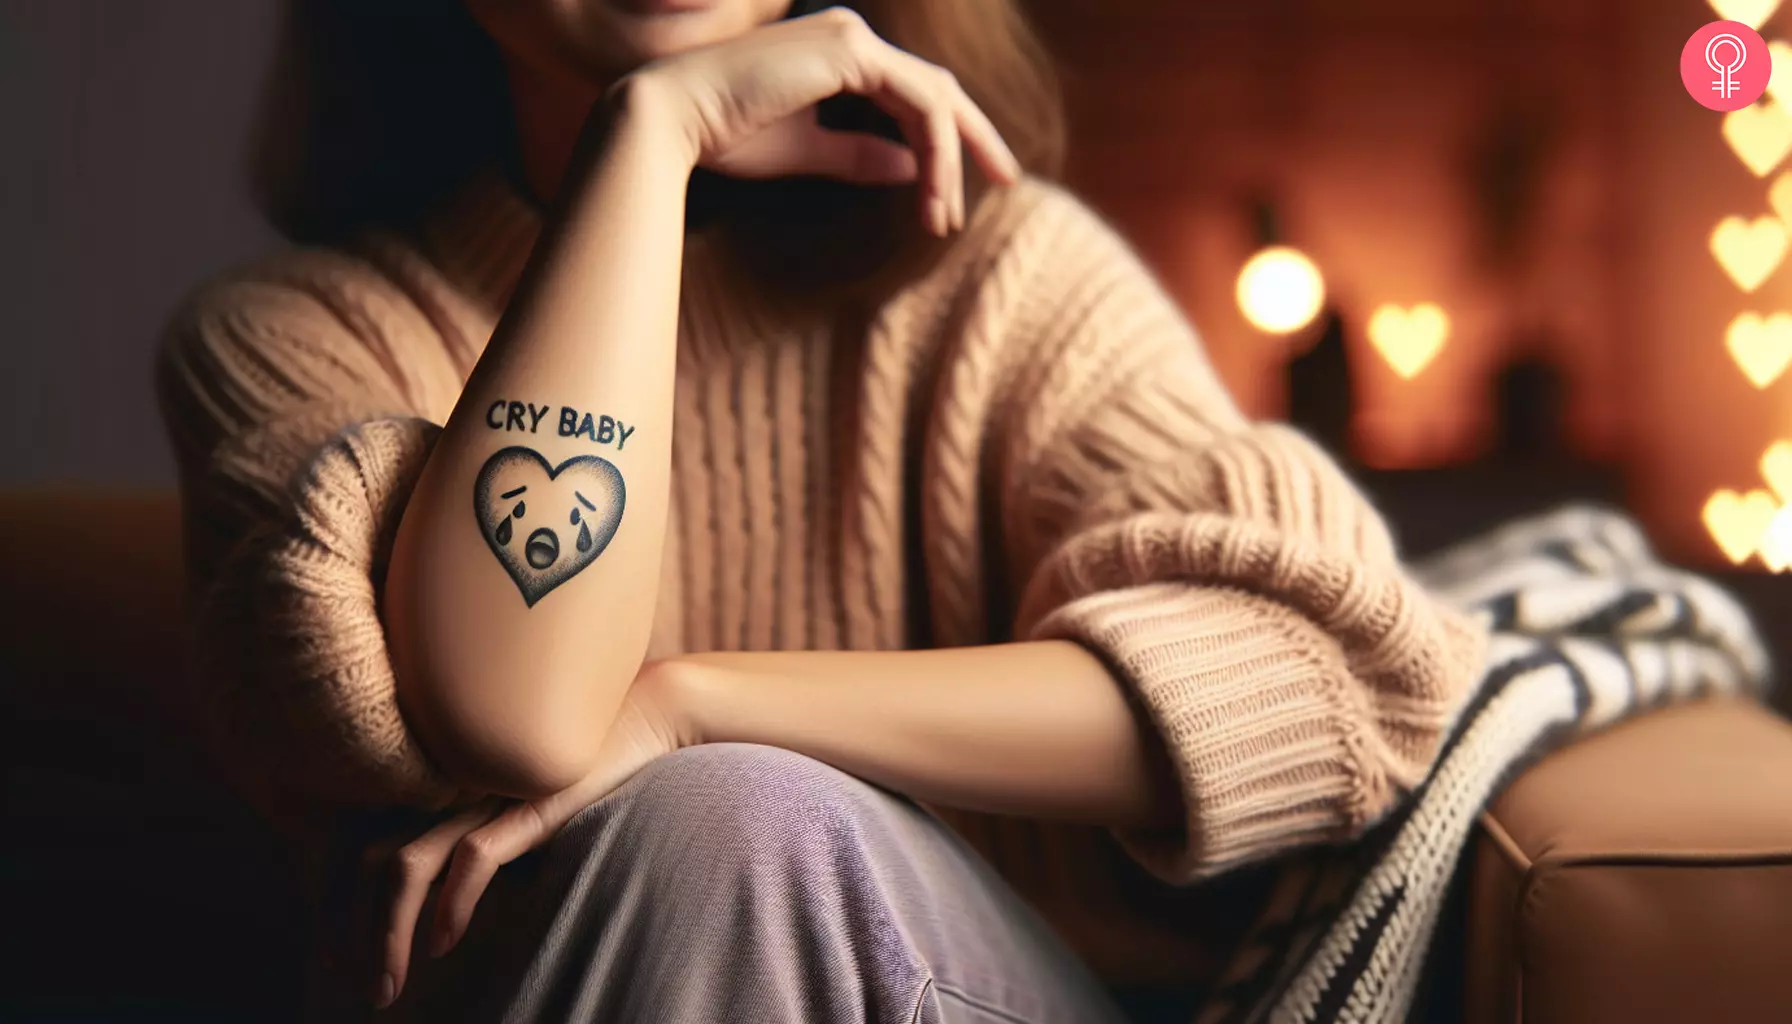 Cry Baby heart tattoo on the forearm